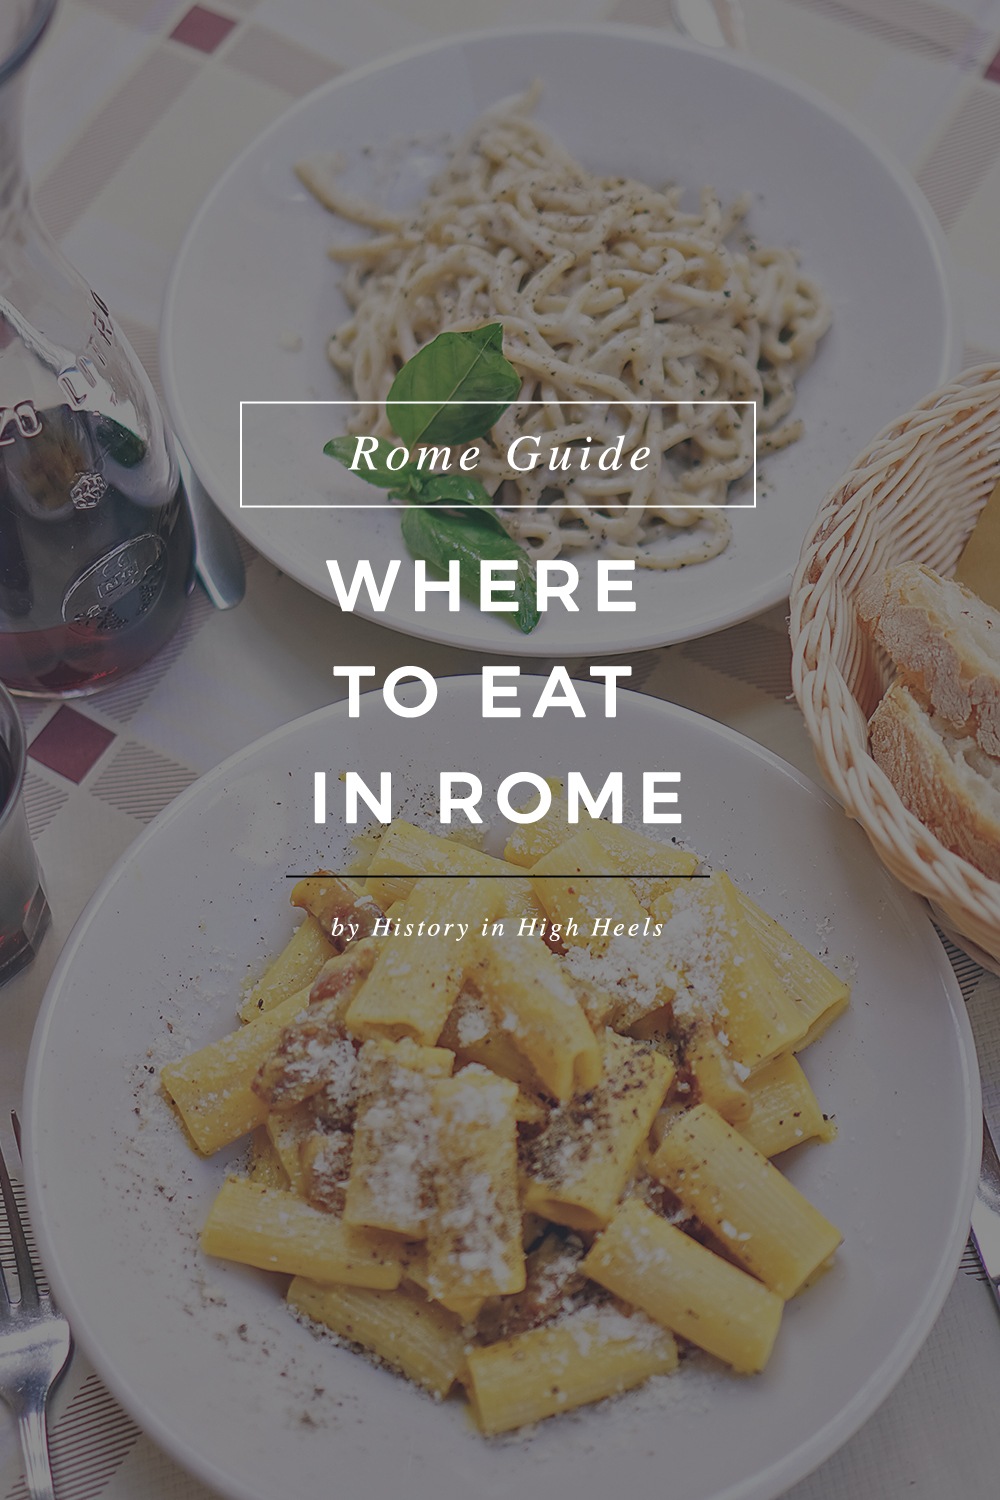 History In High Heels: Where to Eat in Rome